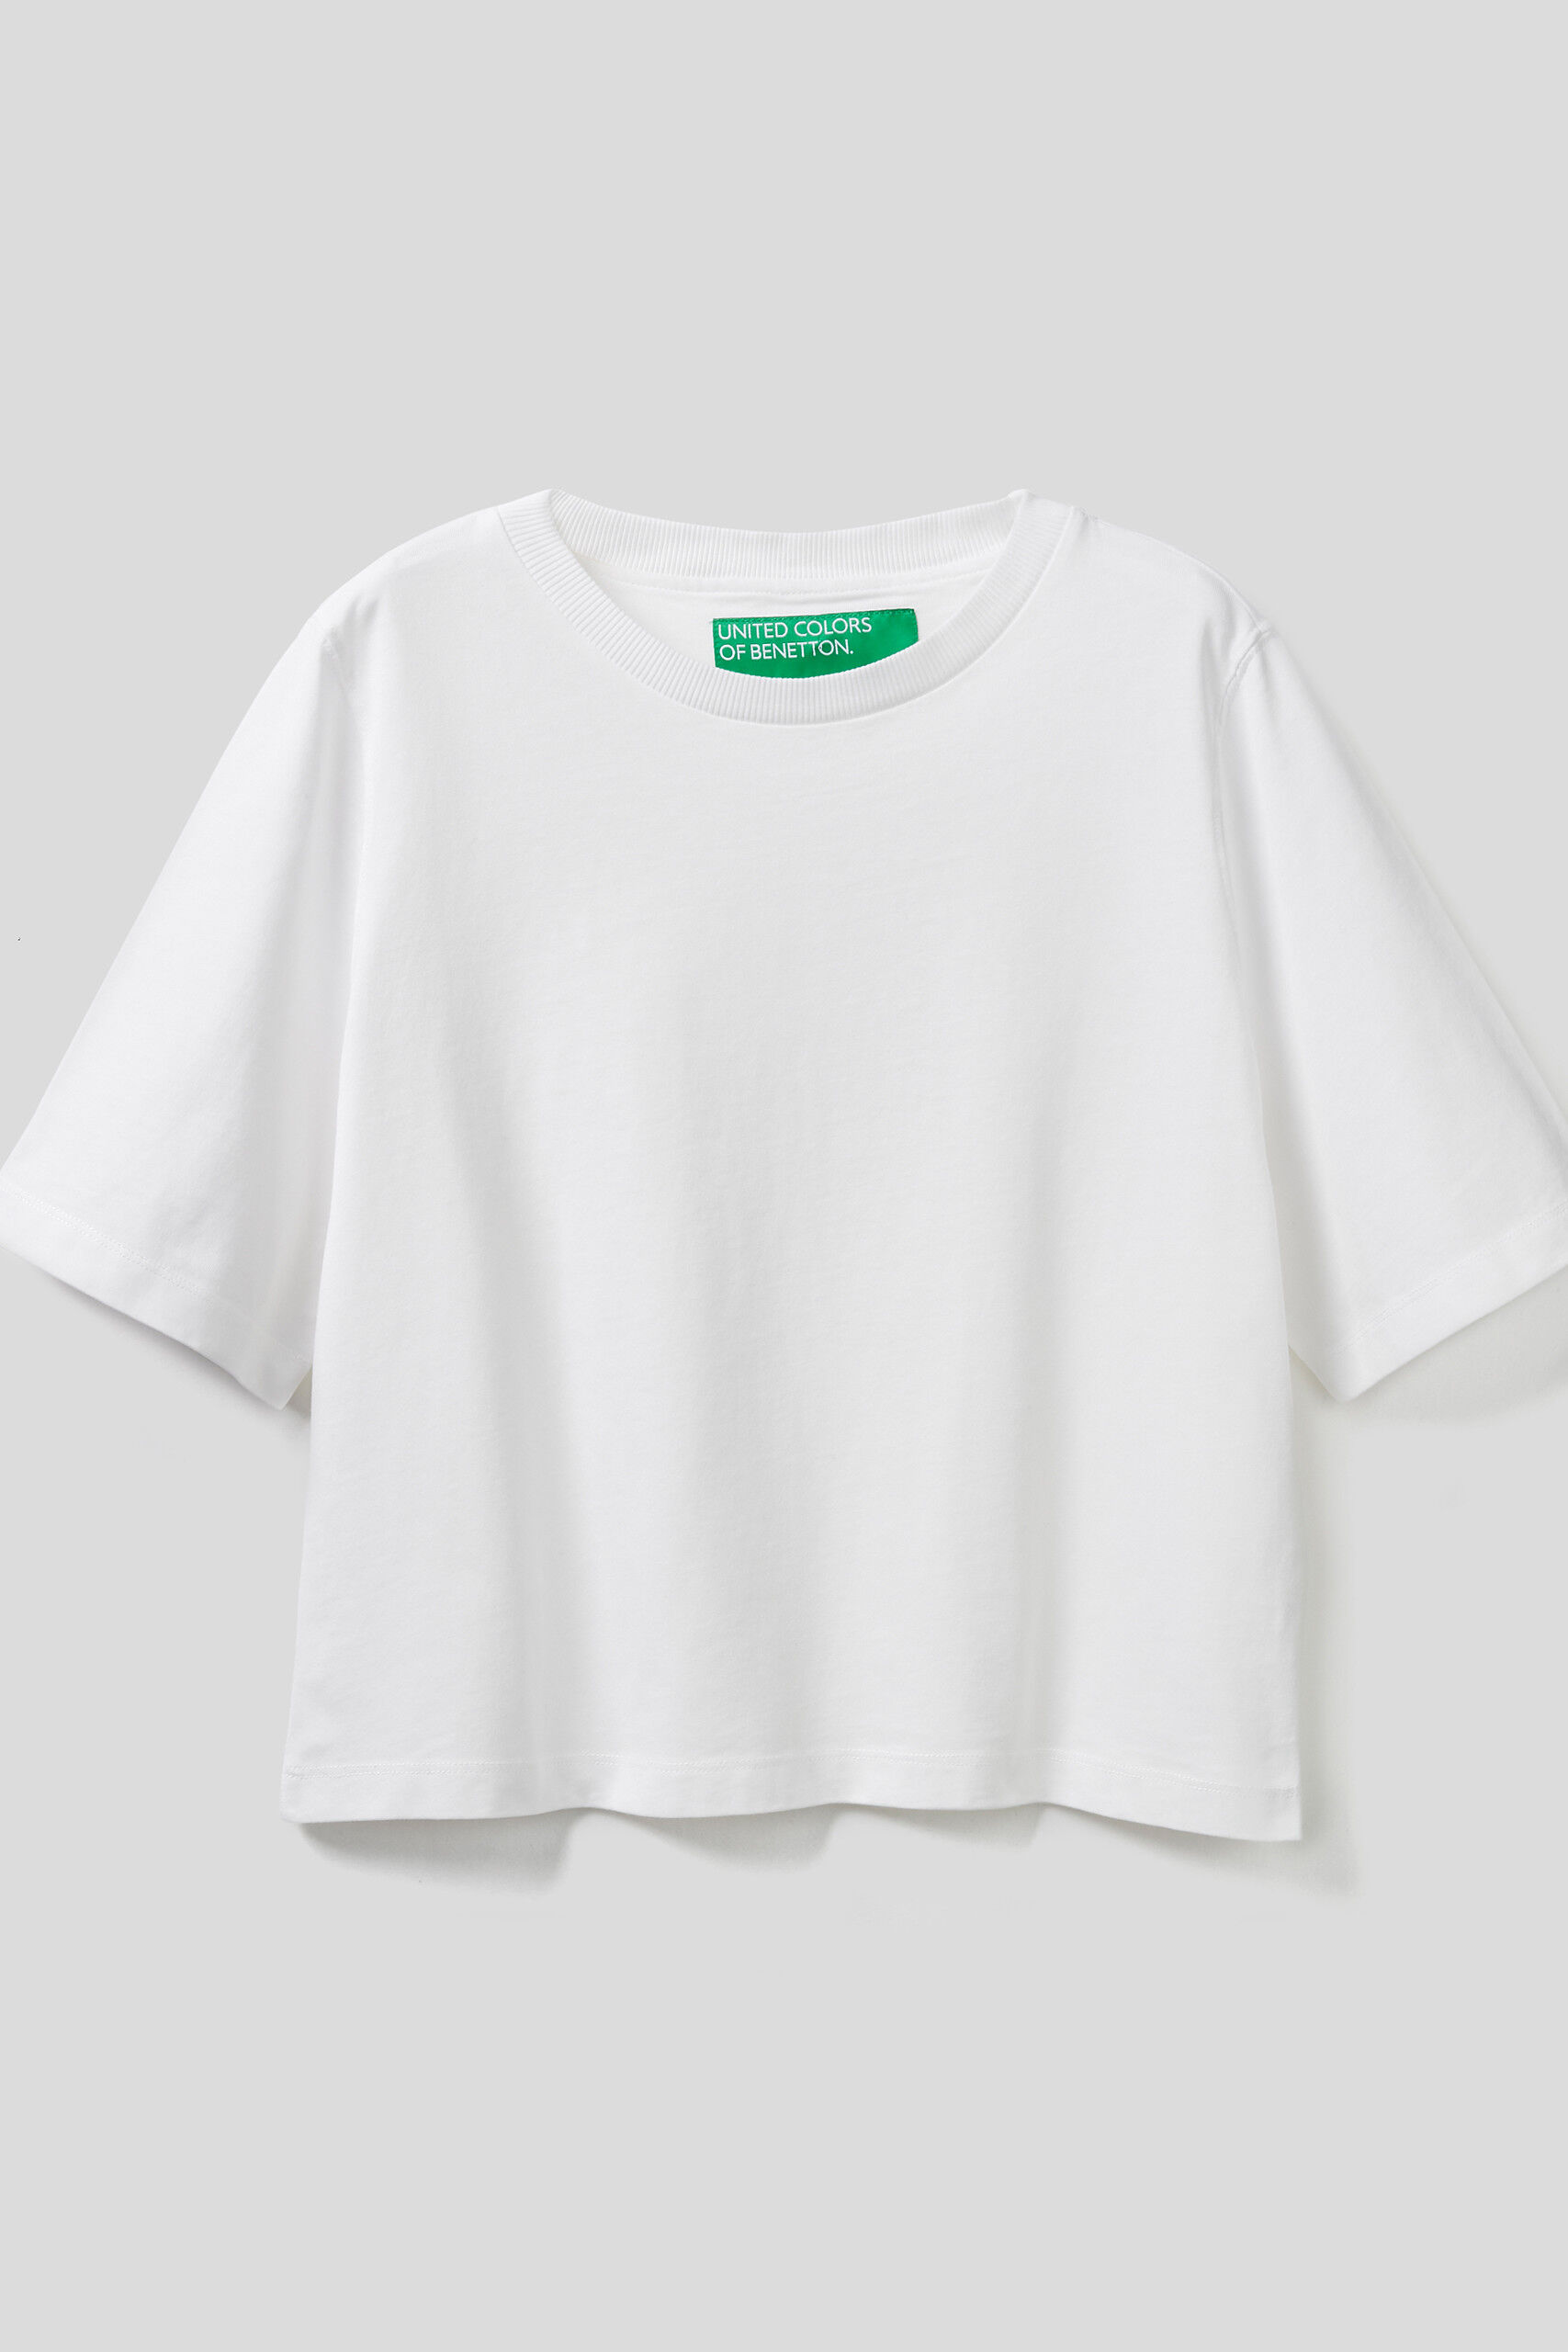 Women's Apparel New Collection 2022 | Benetton